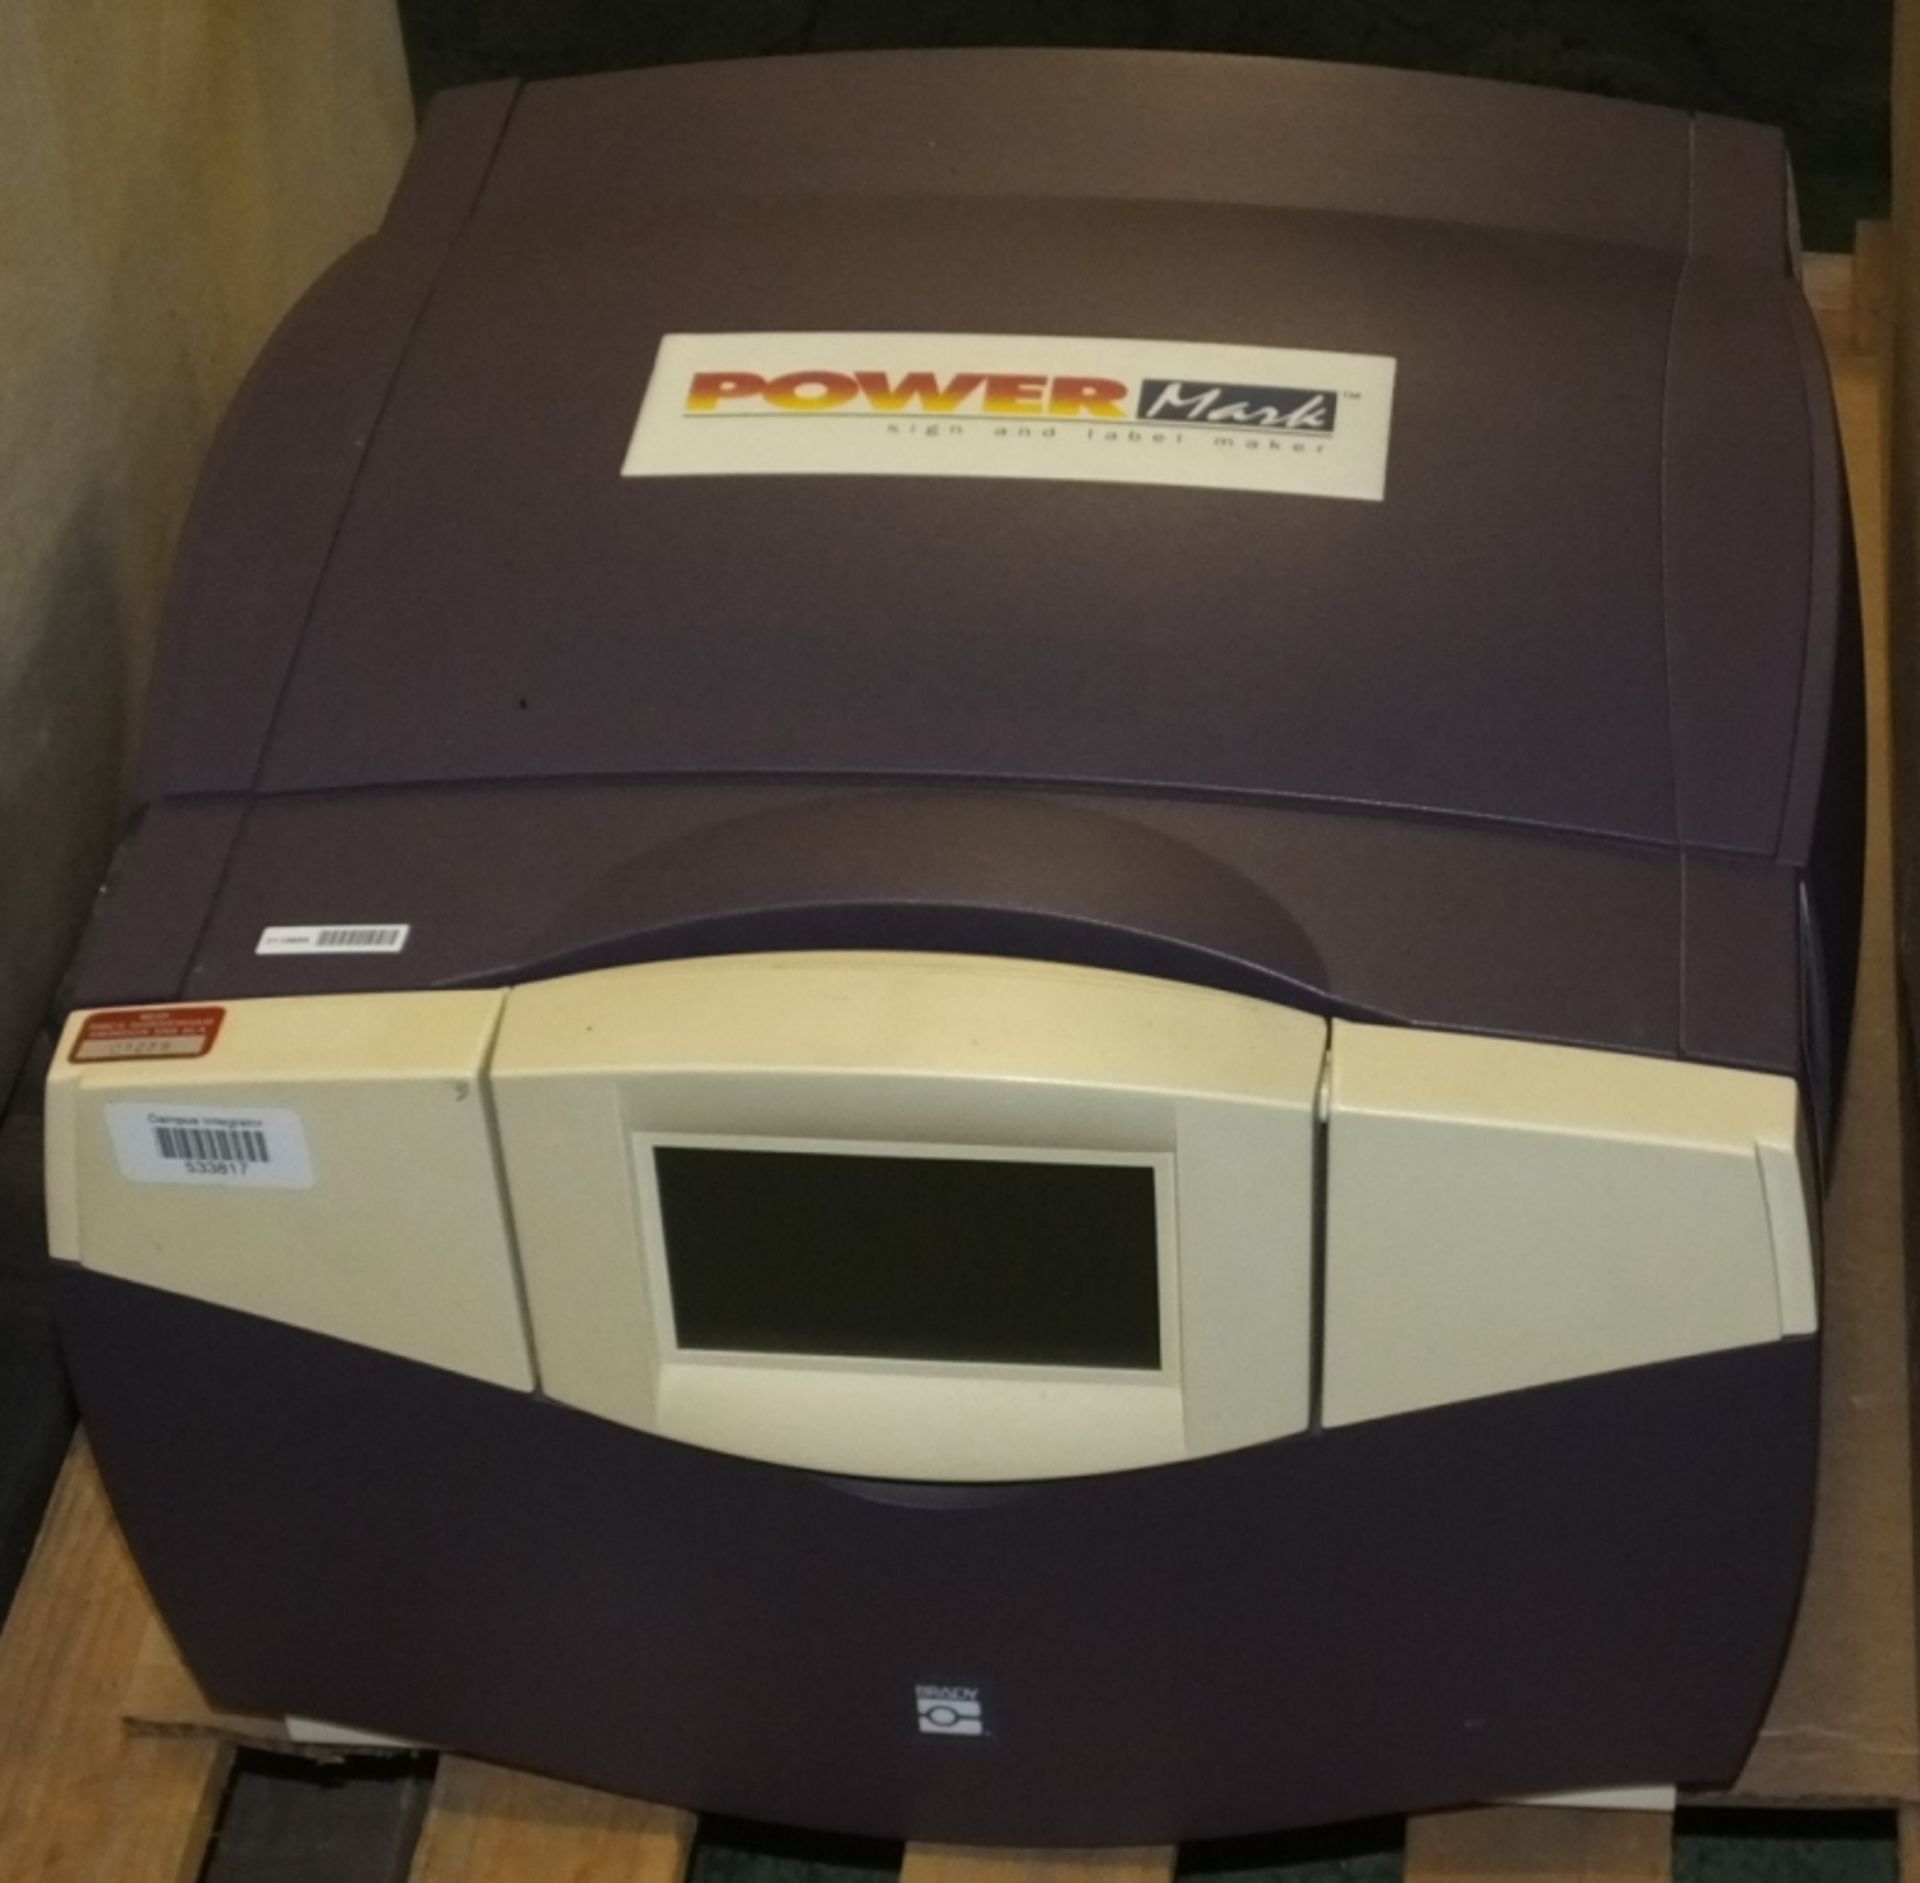 PowerMask Sign / Label Machine & Accessories - Image 2 of 3